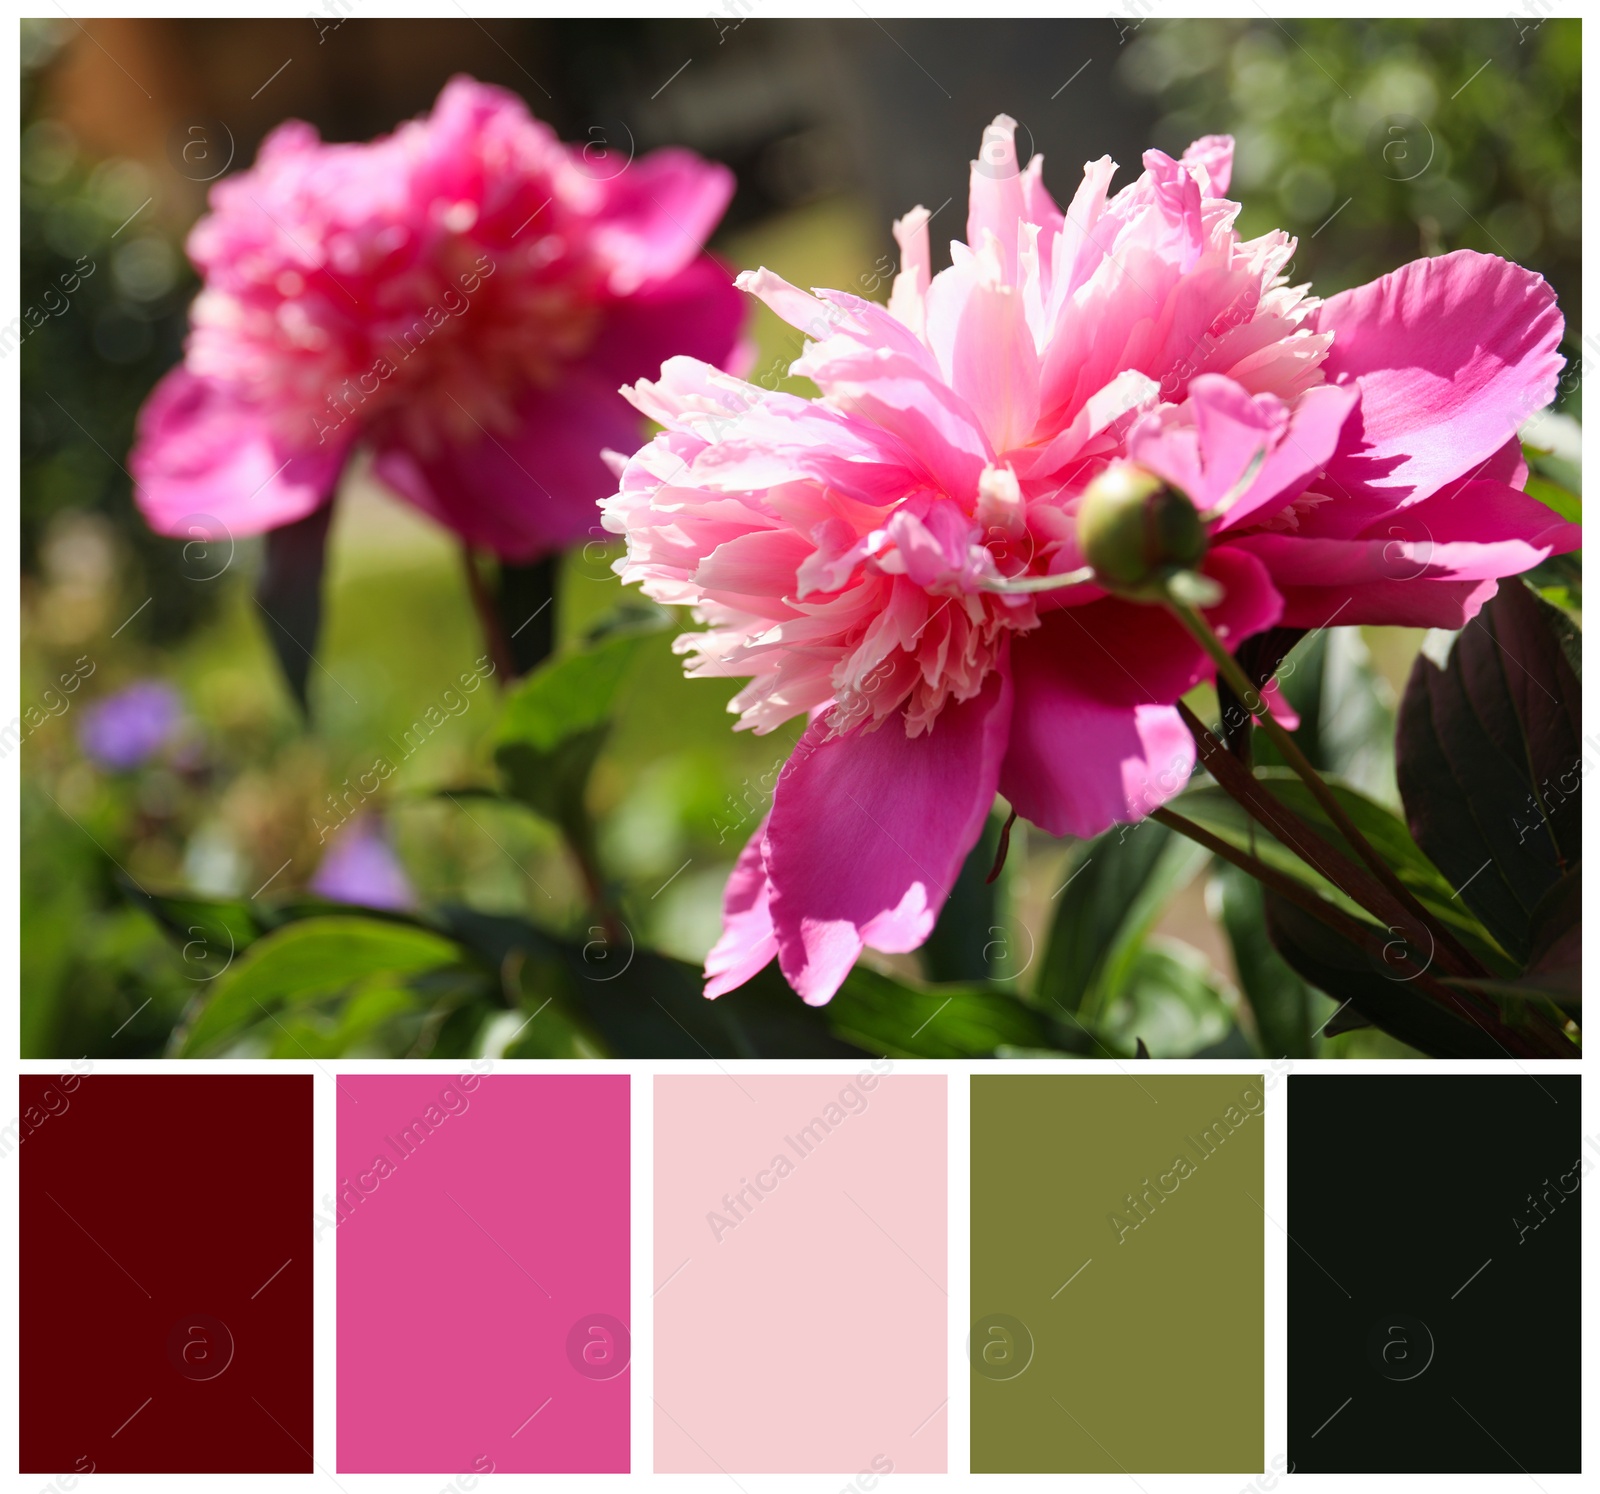 Image of Blooming pink peony flowers and color palette. Collage